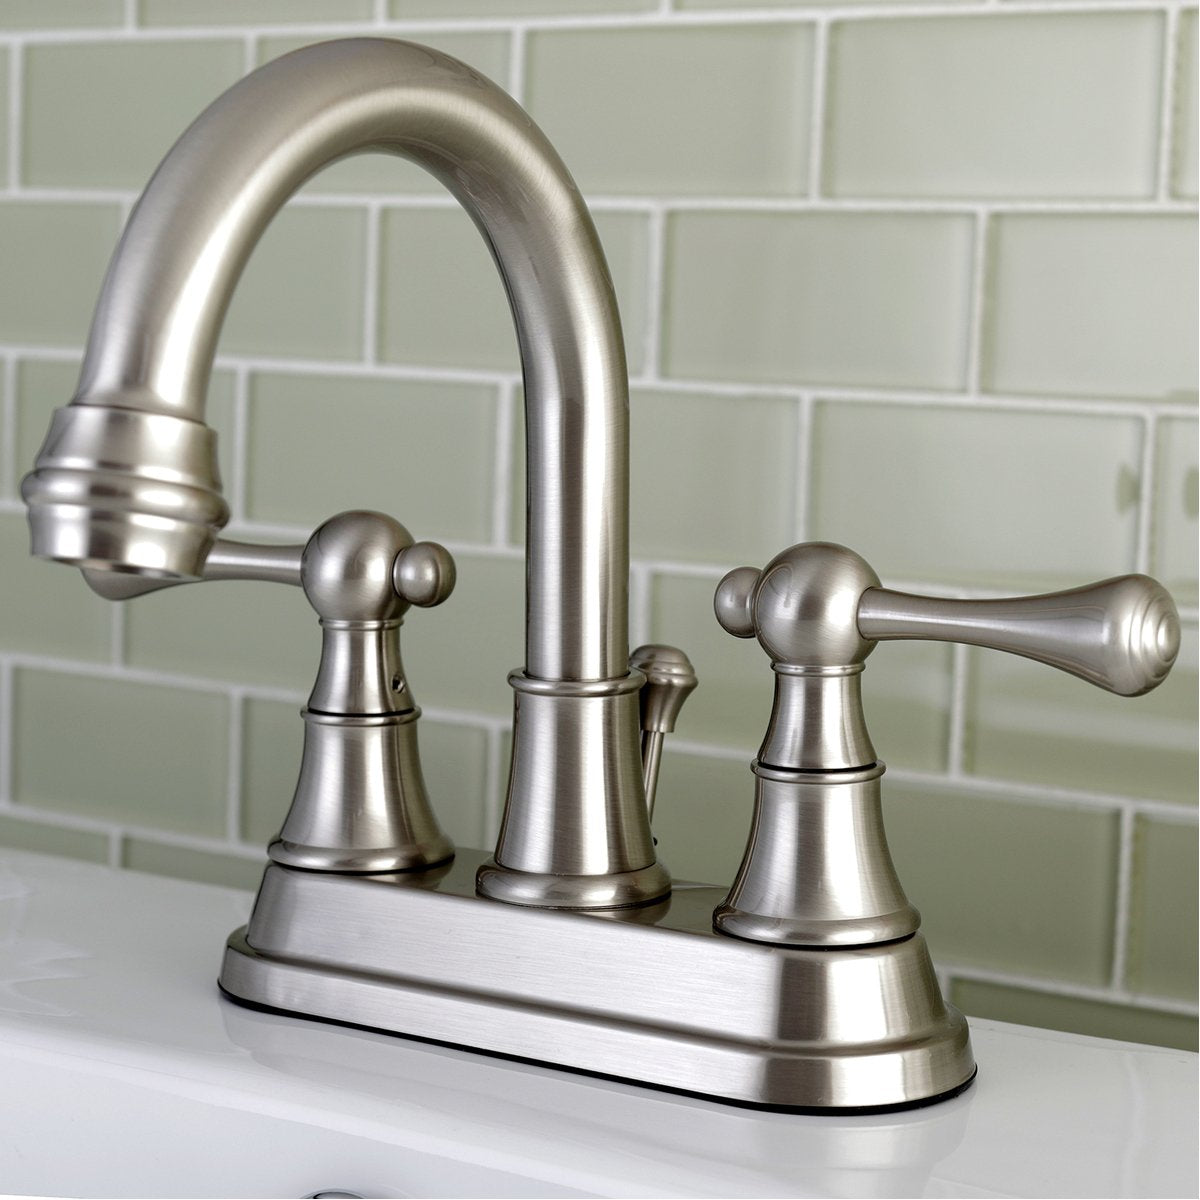 Kingston Brass English Country 4-Inch Centerset Bathroom Faucet